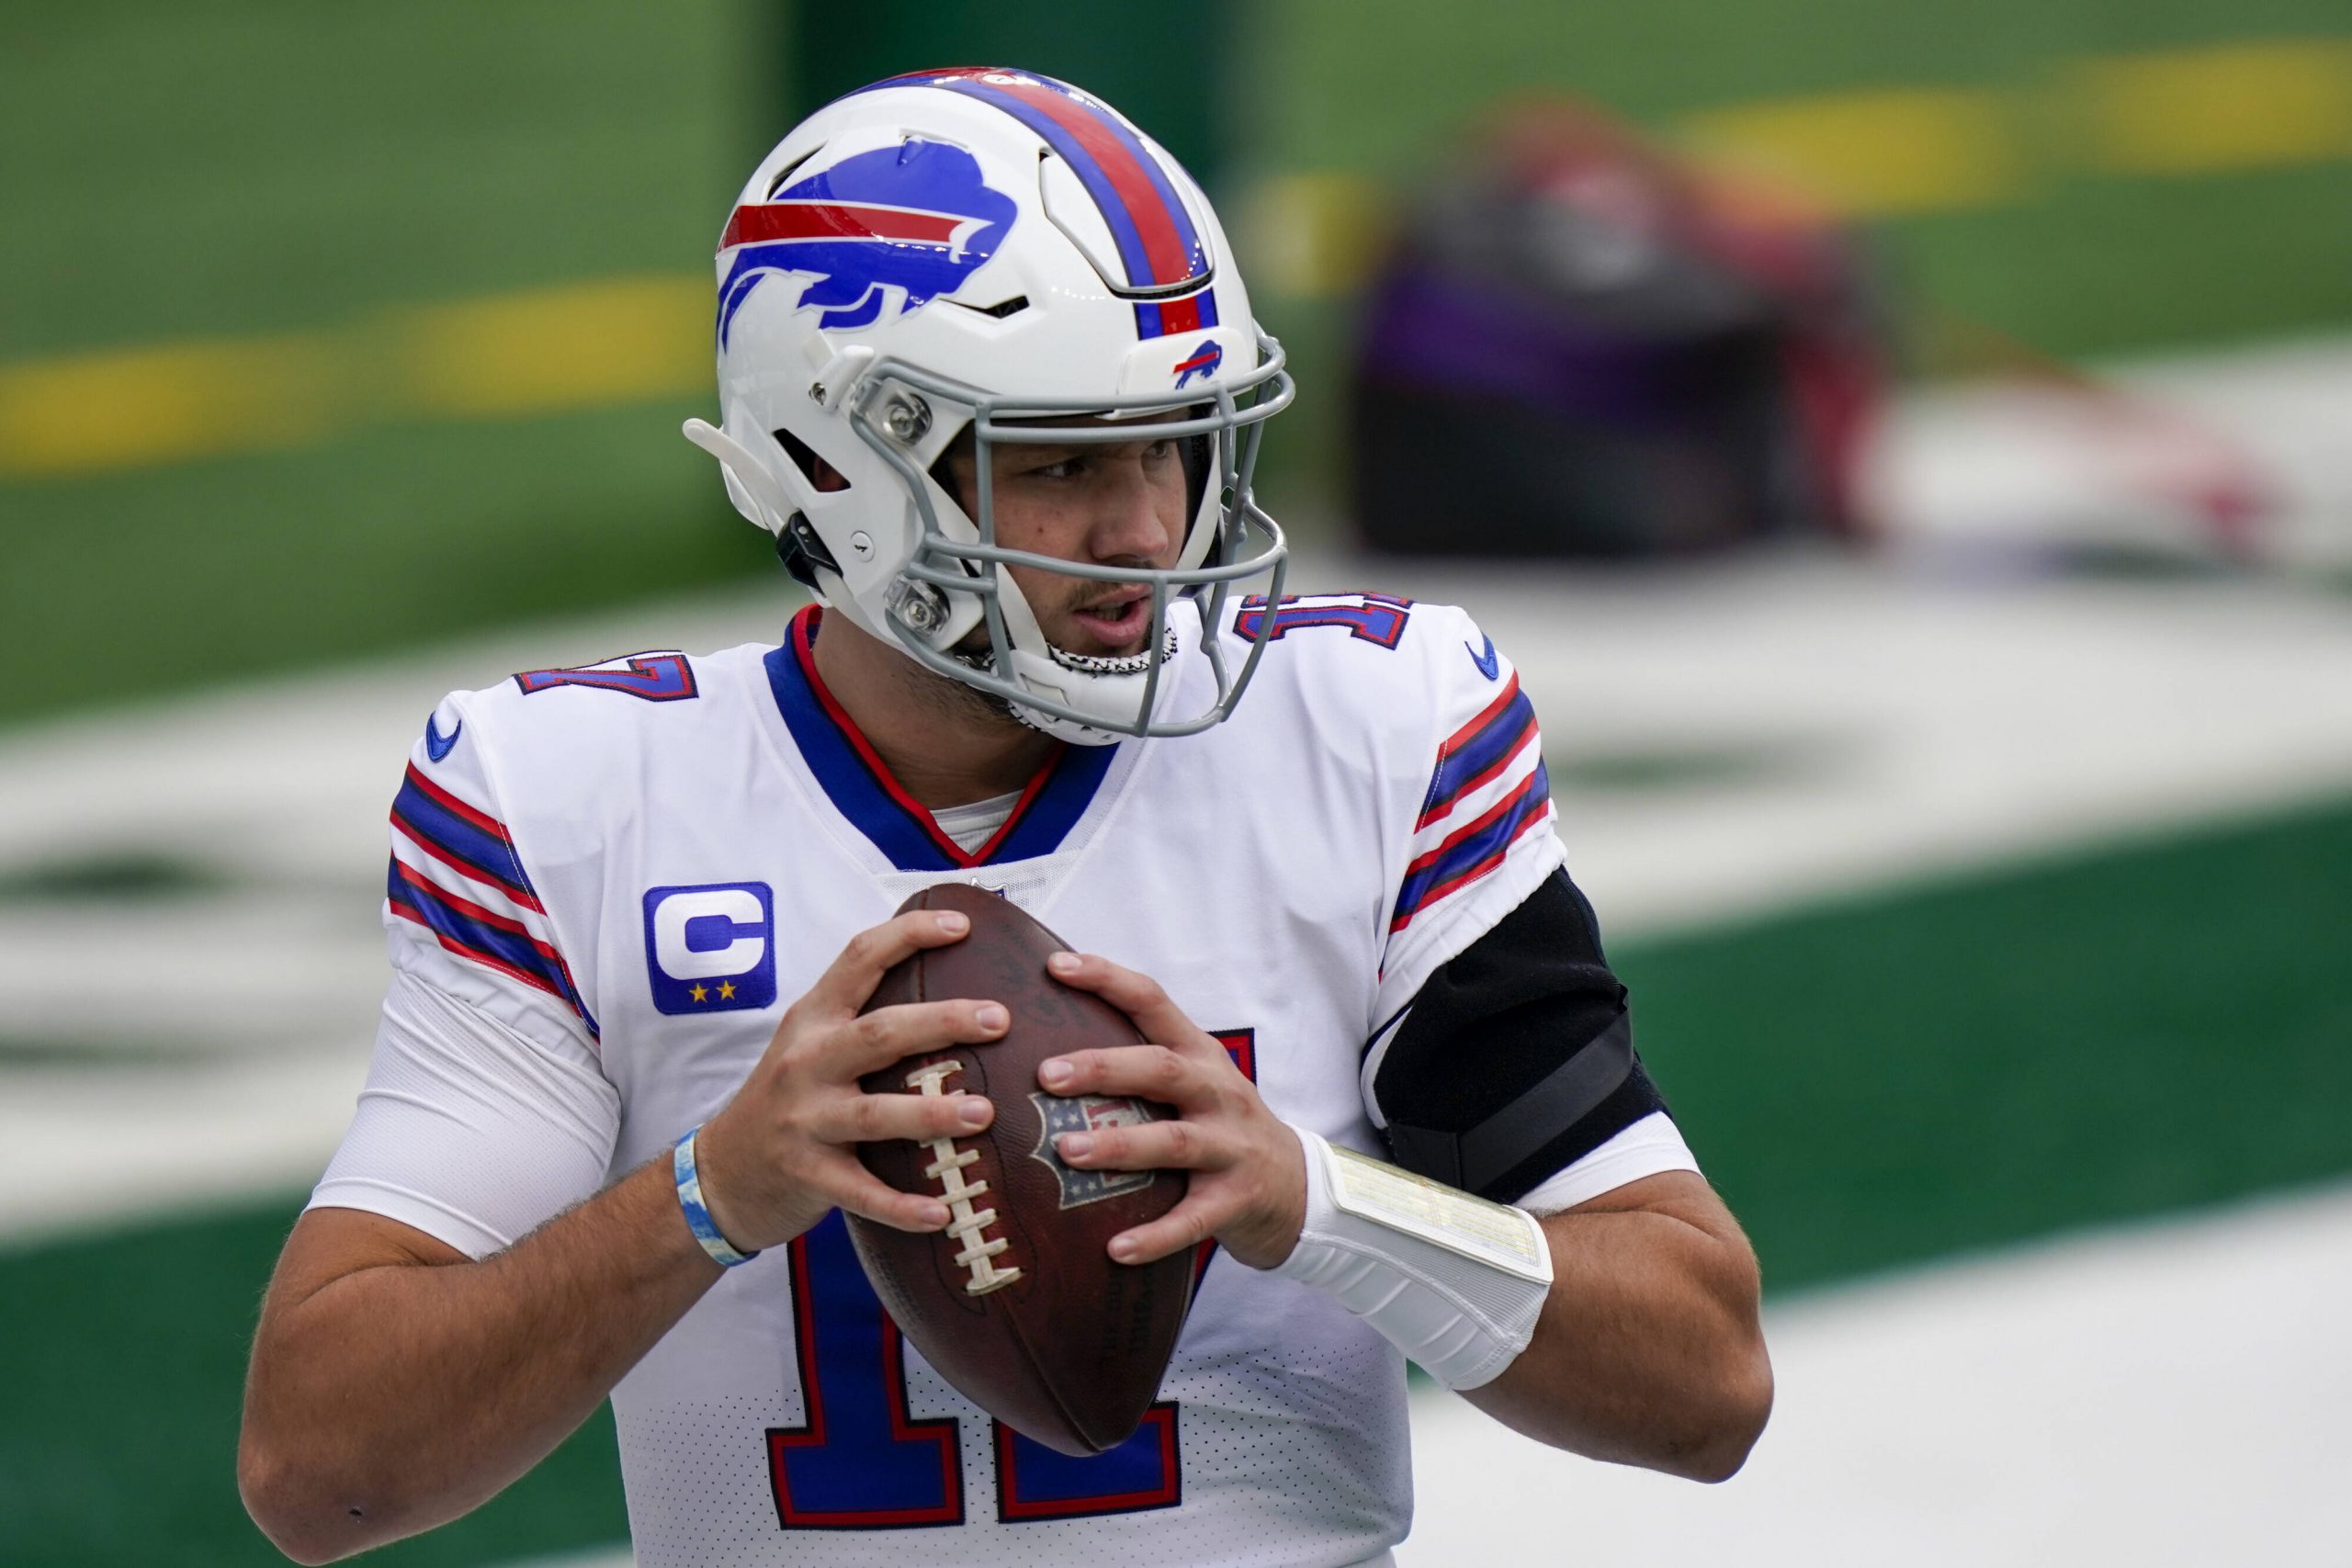 Buffalo Bills quarterback Josh Allen warms up before a game against the New York Jets in week 7 of the NFL, American Fo